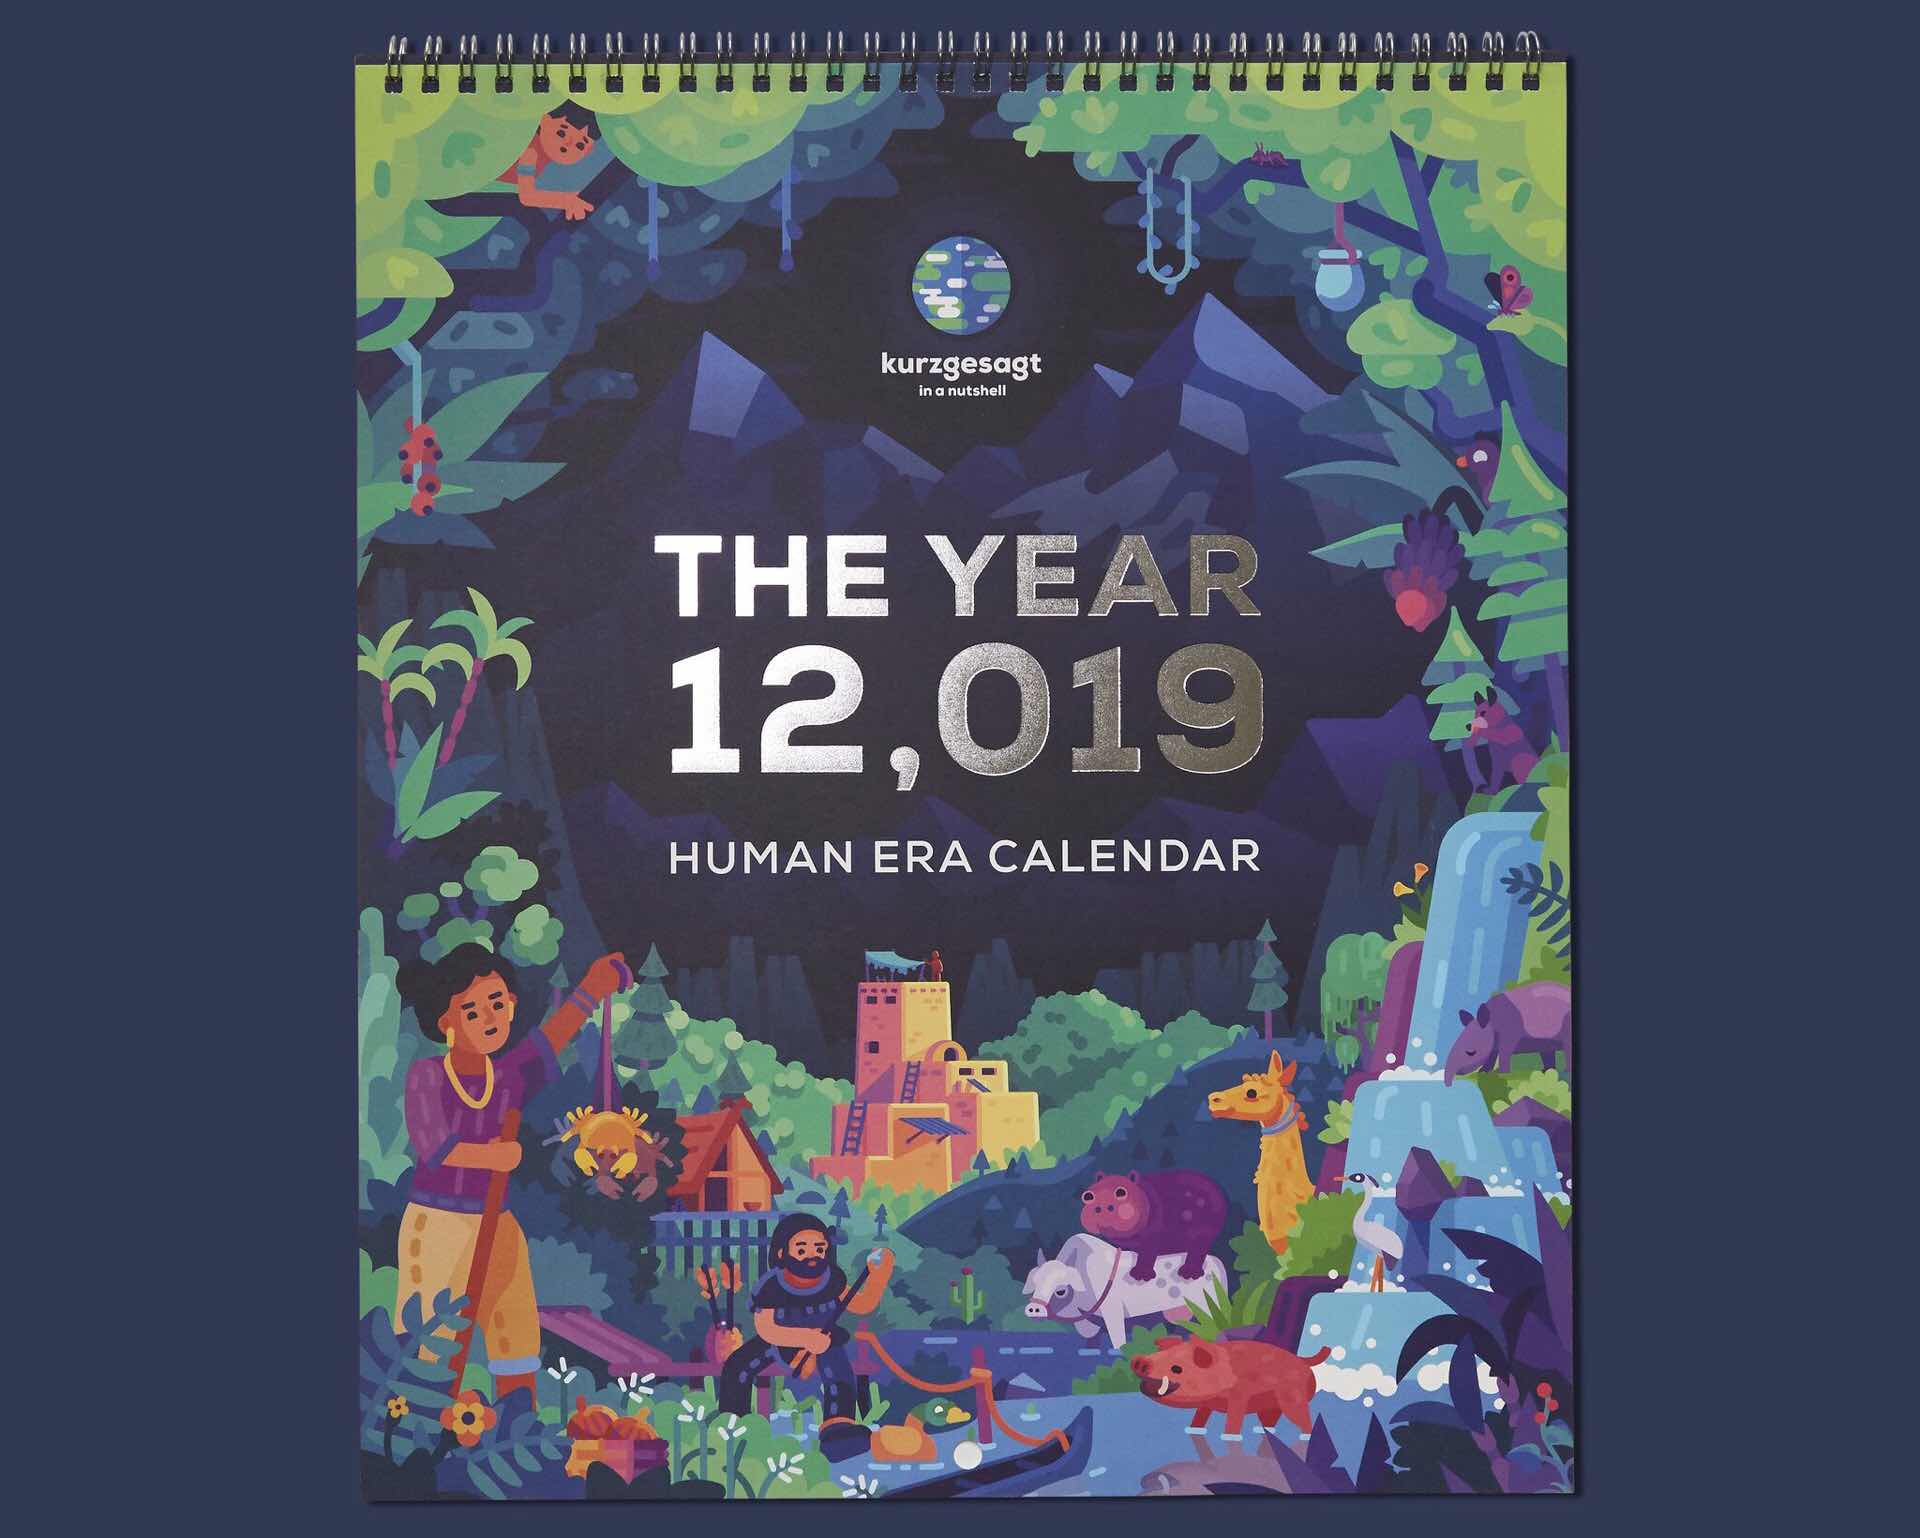 As part of their ongoing campaign to [establish a new history for humanity](https://youtube.com/watch?v=czgOWmtGVGs), Kurzgesagt's new calendar celebrates the *true* upcoming year of 12,019 H.E. ($25)